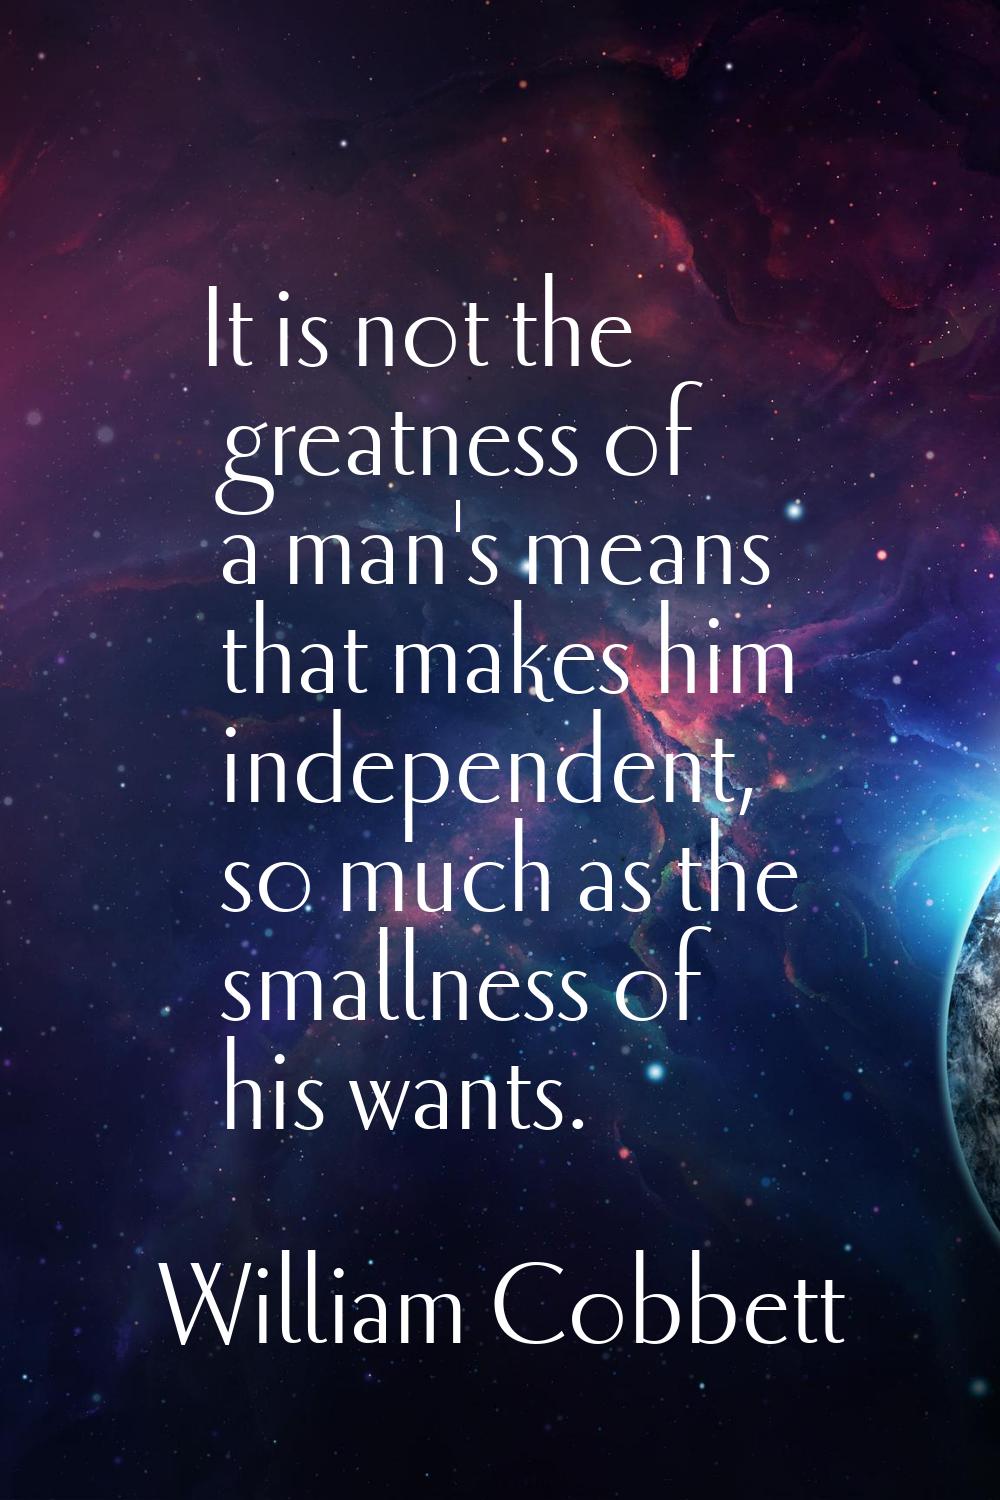 It is not the greatness of a man's means that makes him independent, so much as the smallness of hi